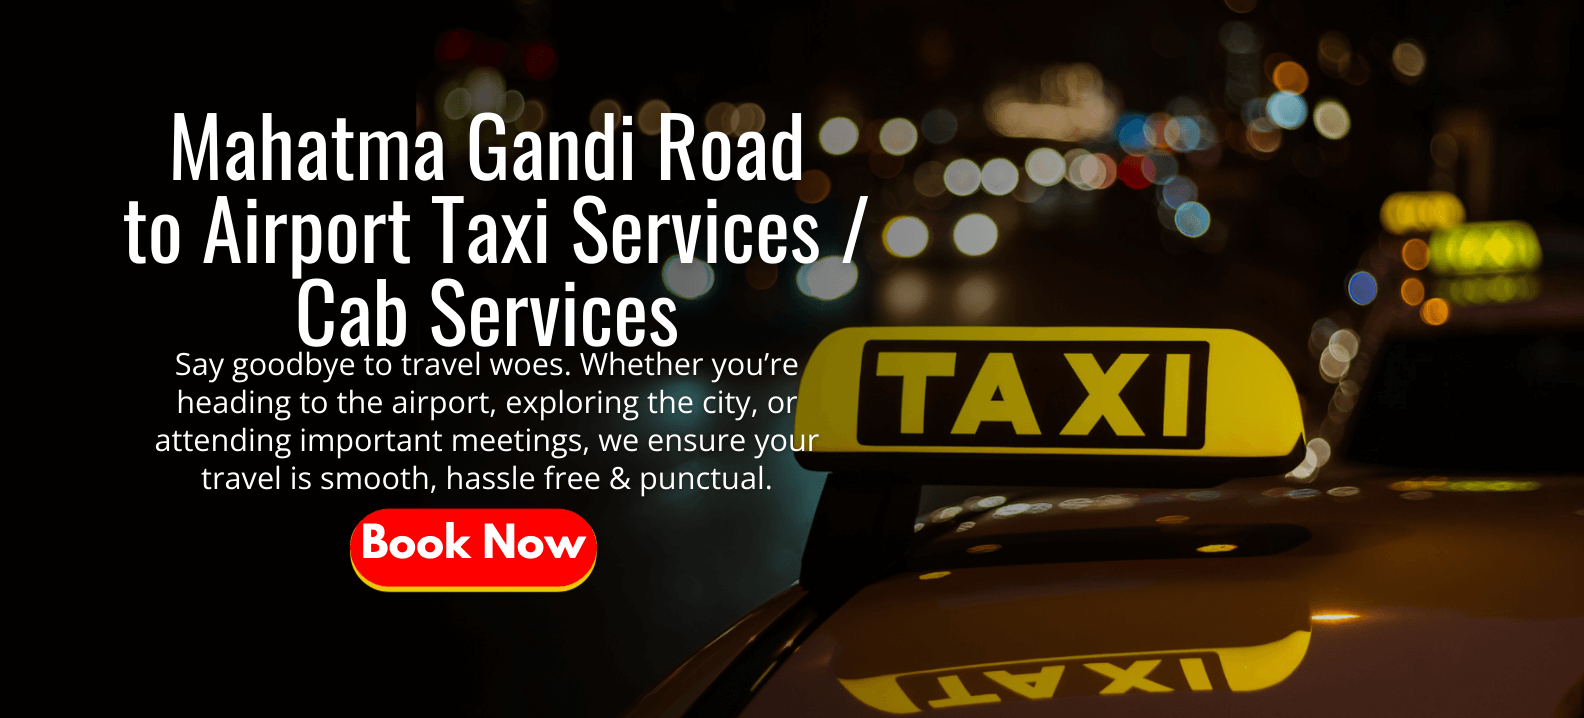 Mahatma Gandi Road to Airport Taxi Services _ Cab Services